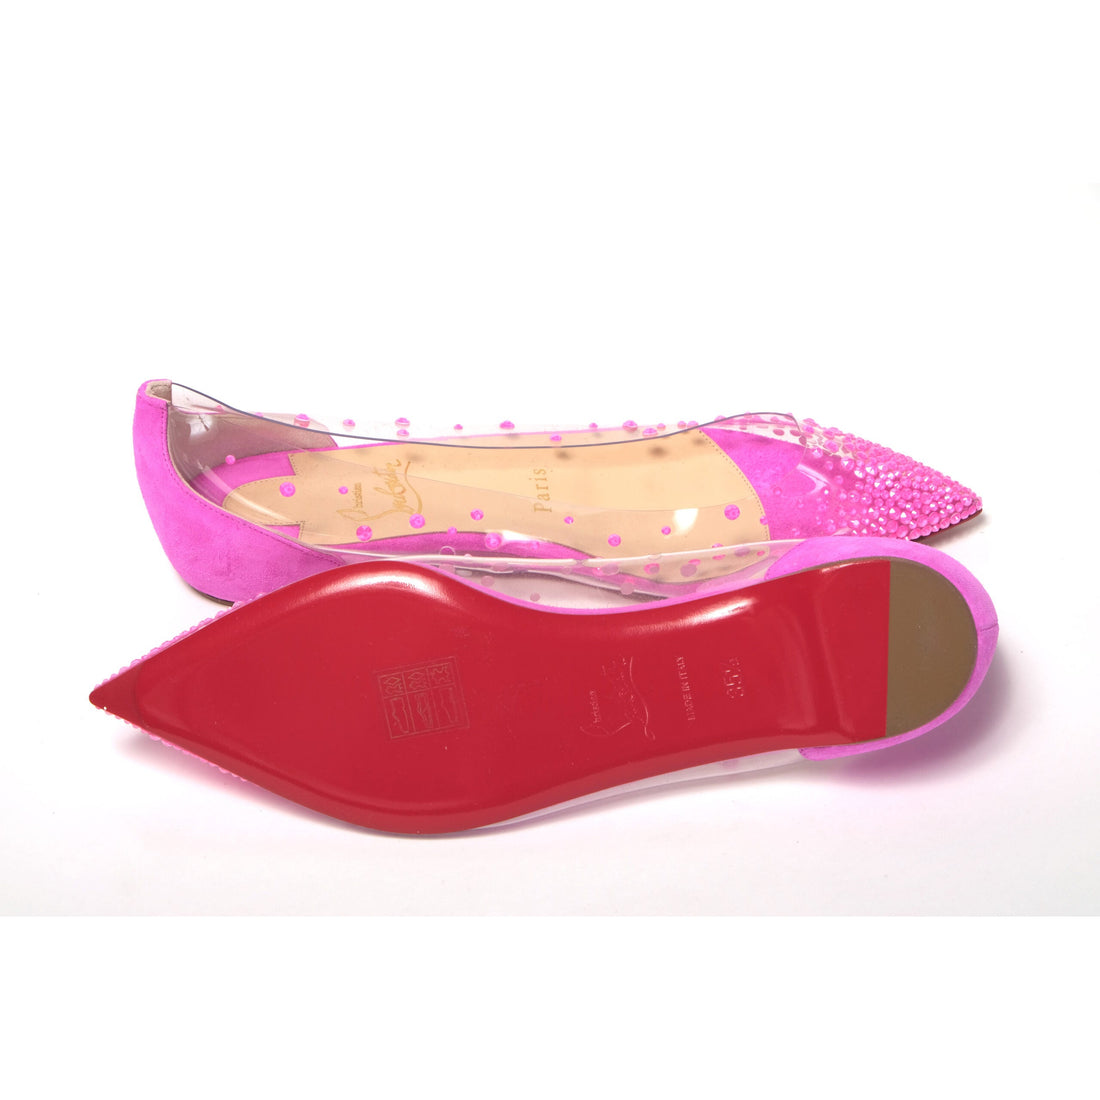 Christian Louboutin Hot Pink Suede Crystals Flat Point Toe Shoe